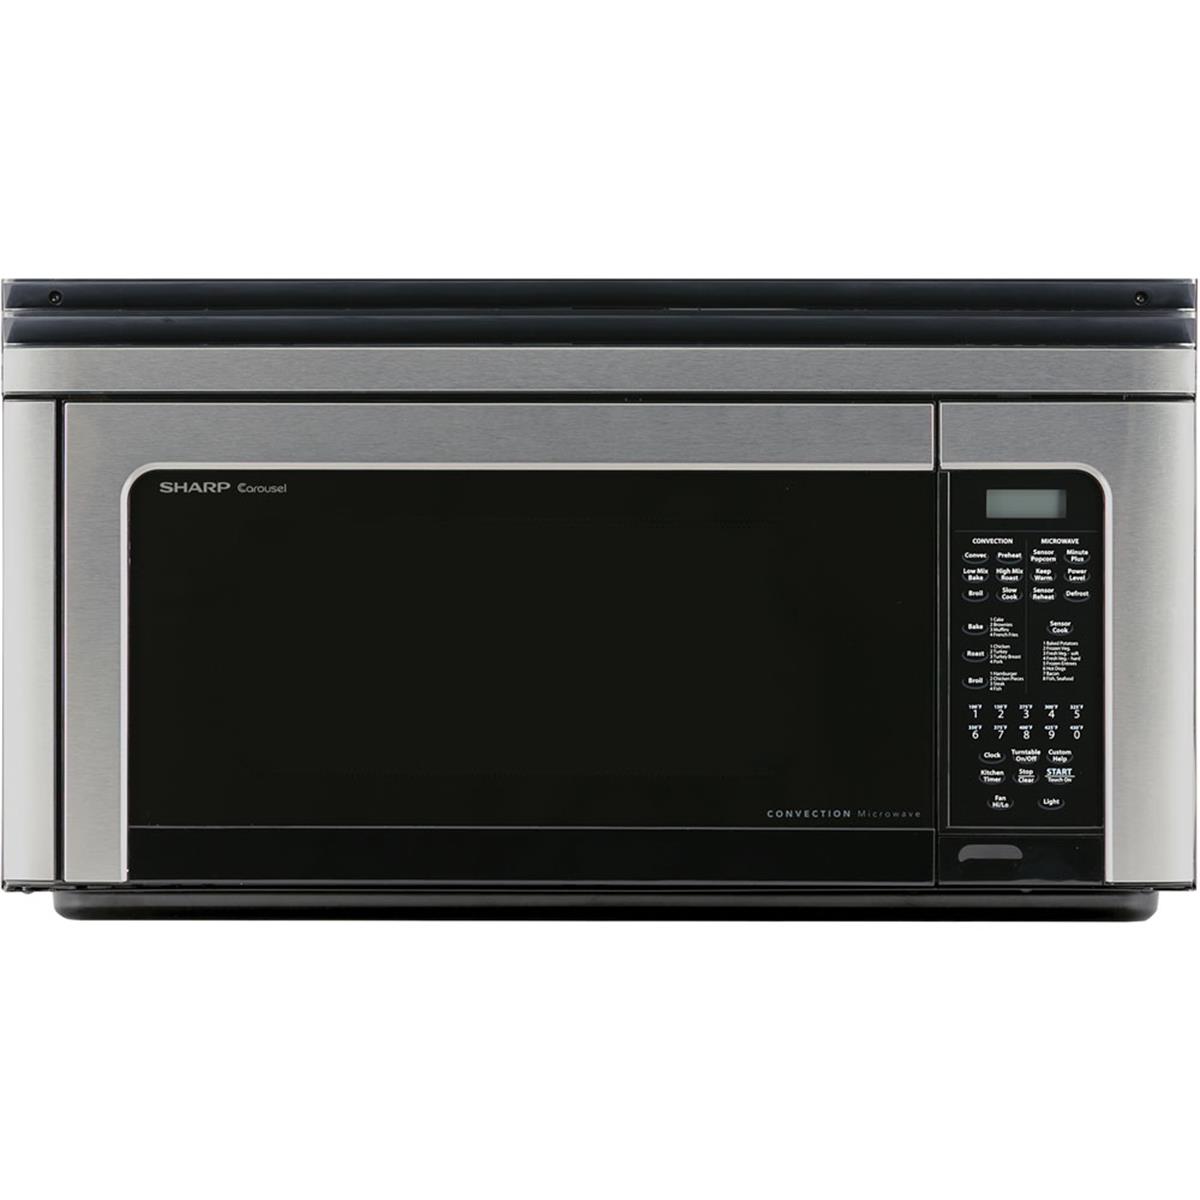 Picture of Sharp R1881LSY 1.1 Cfm 850 watt Otr Convection Microwave Stainless Steel